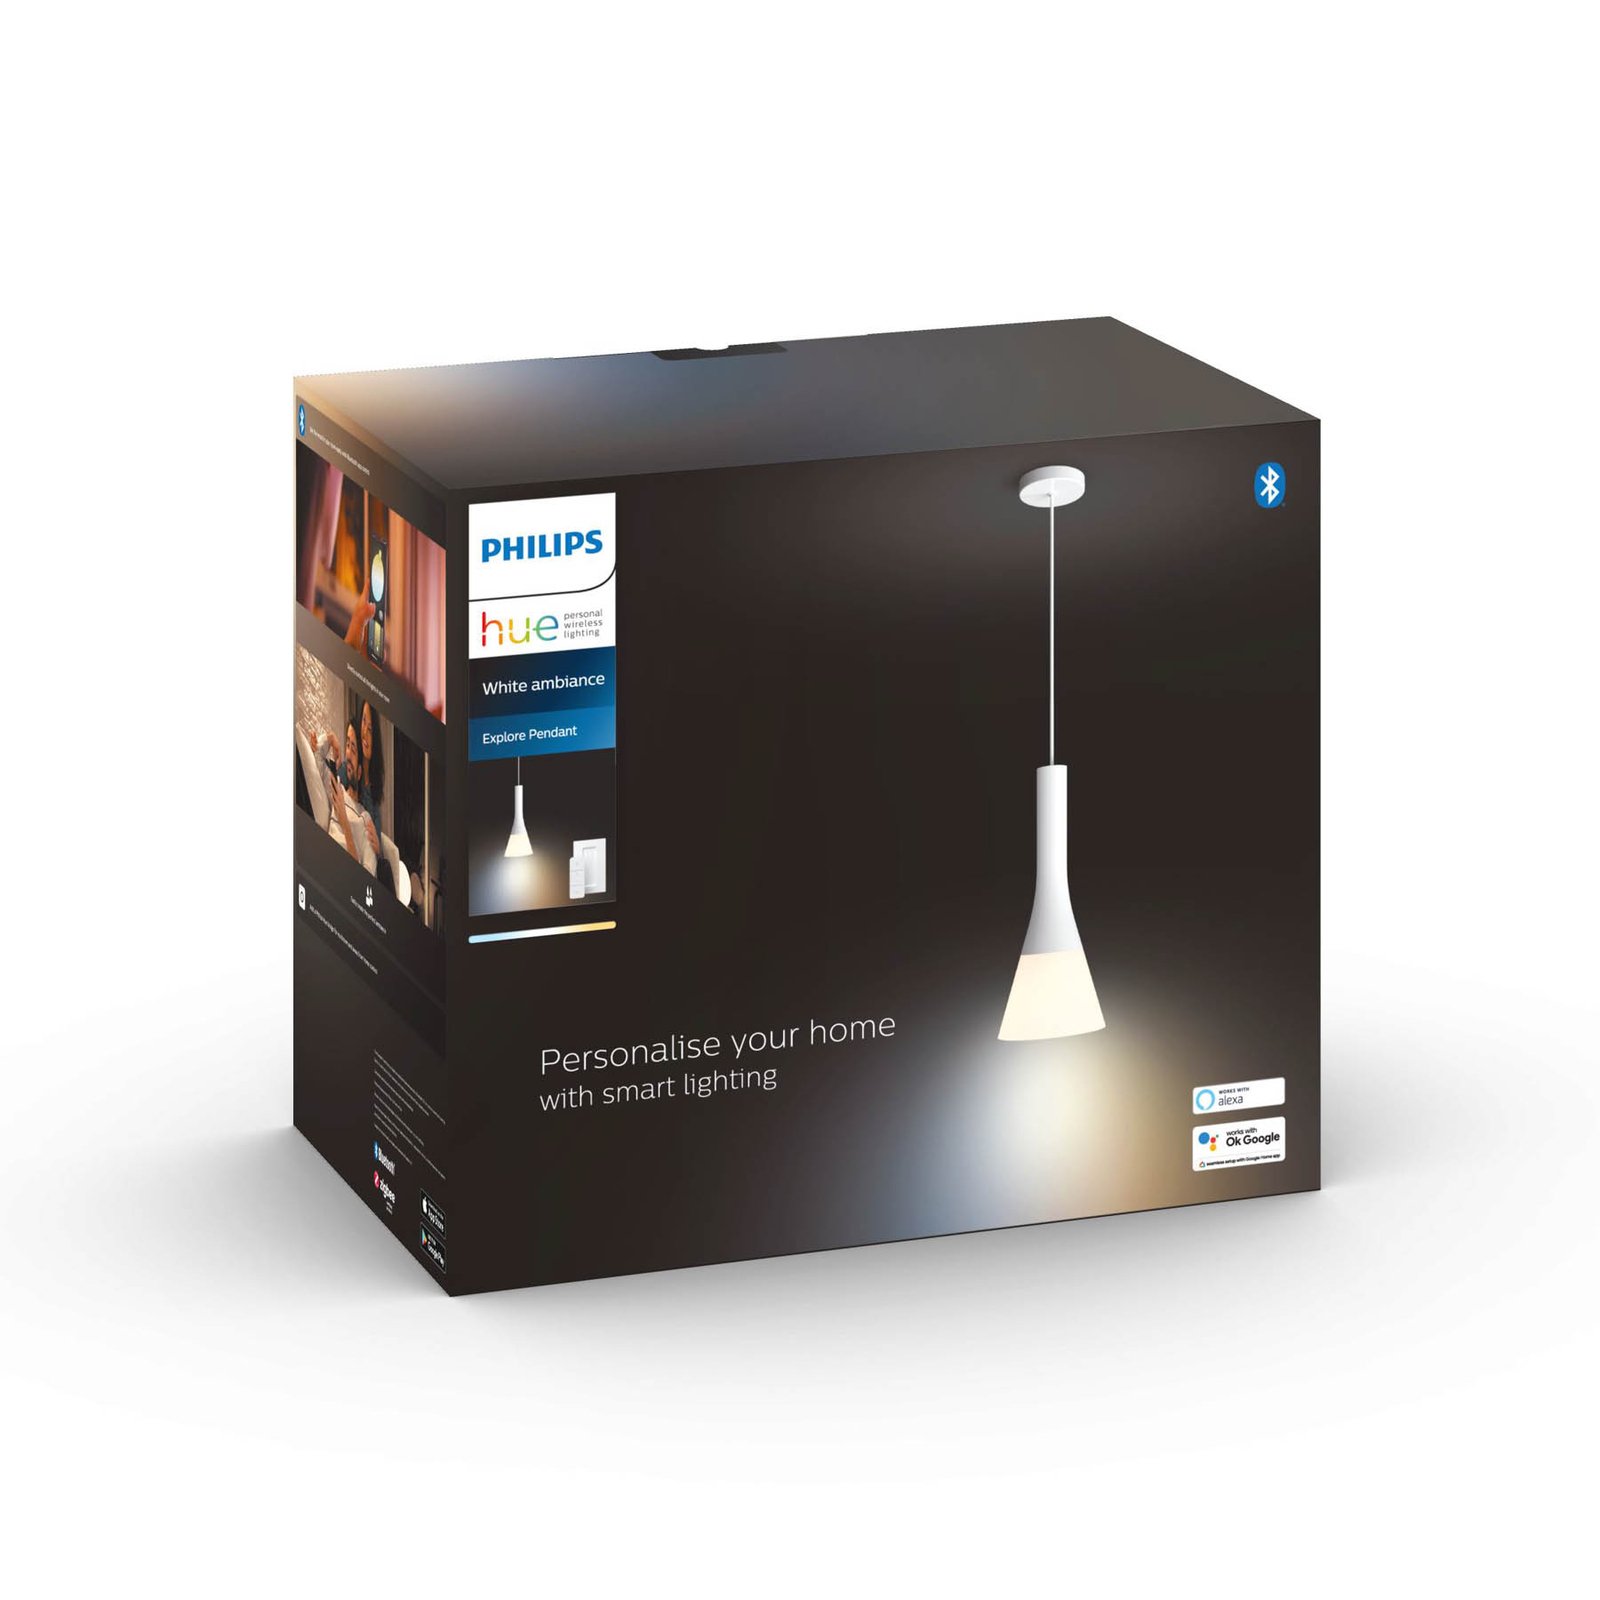 Philips Hue White Ambiance pendellampe dimmebryter